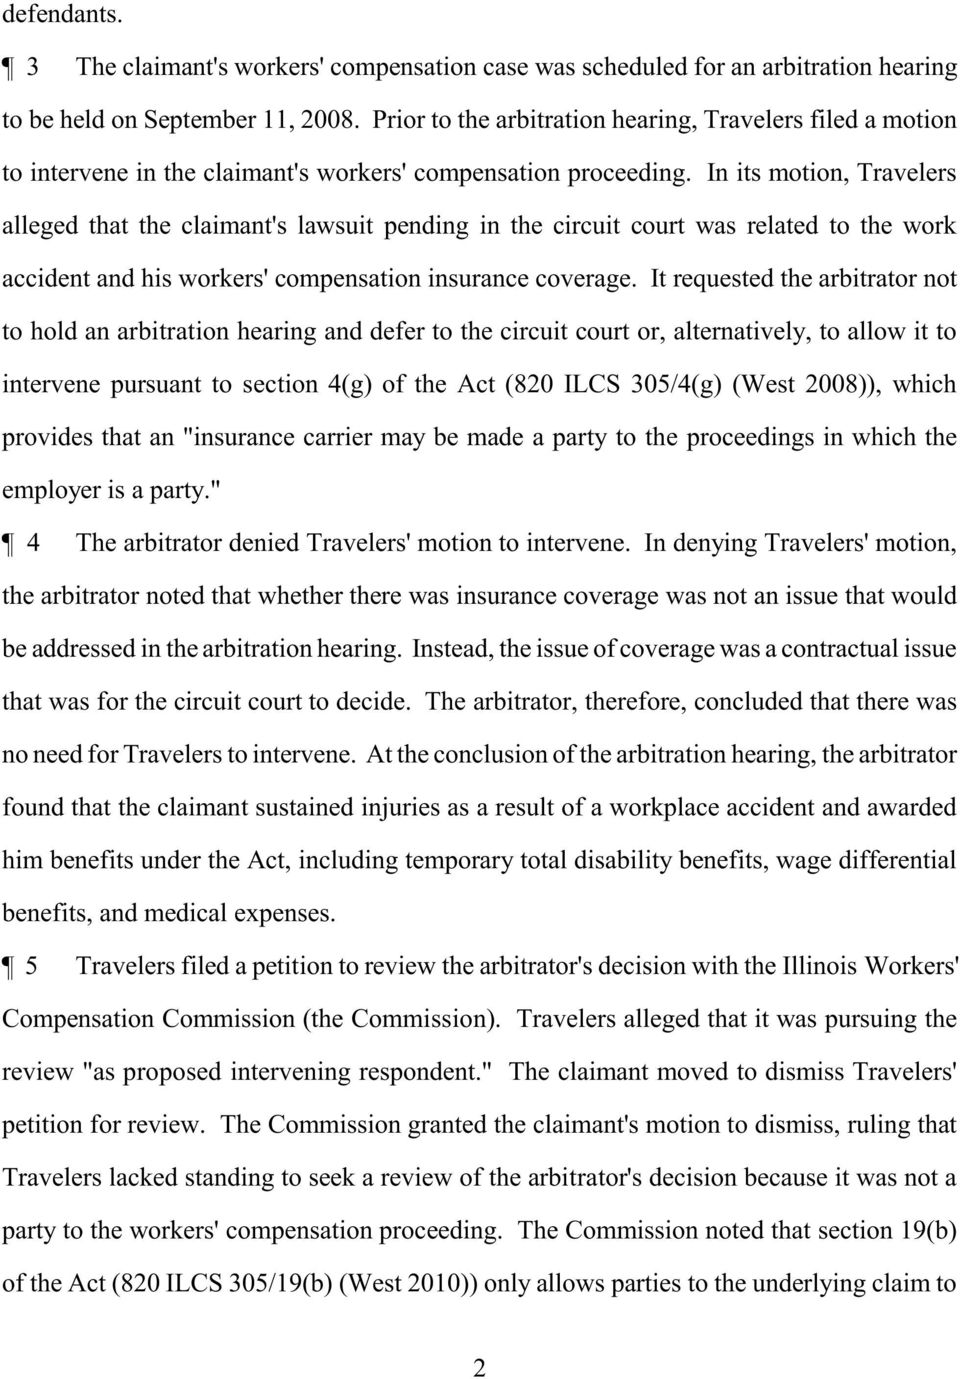 In its motion, Travelers alleged that the claimant's lawsuit pending in the circuit court was related to the work accident and his workers' compensation insurance coverage.